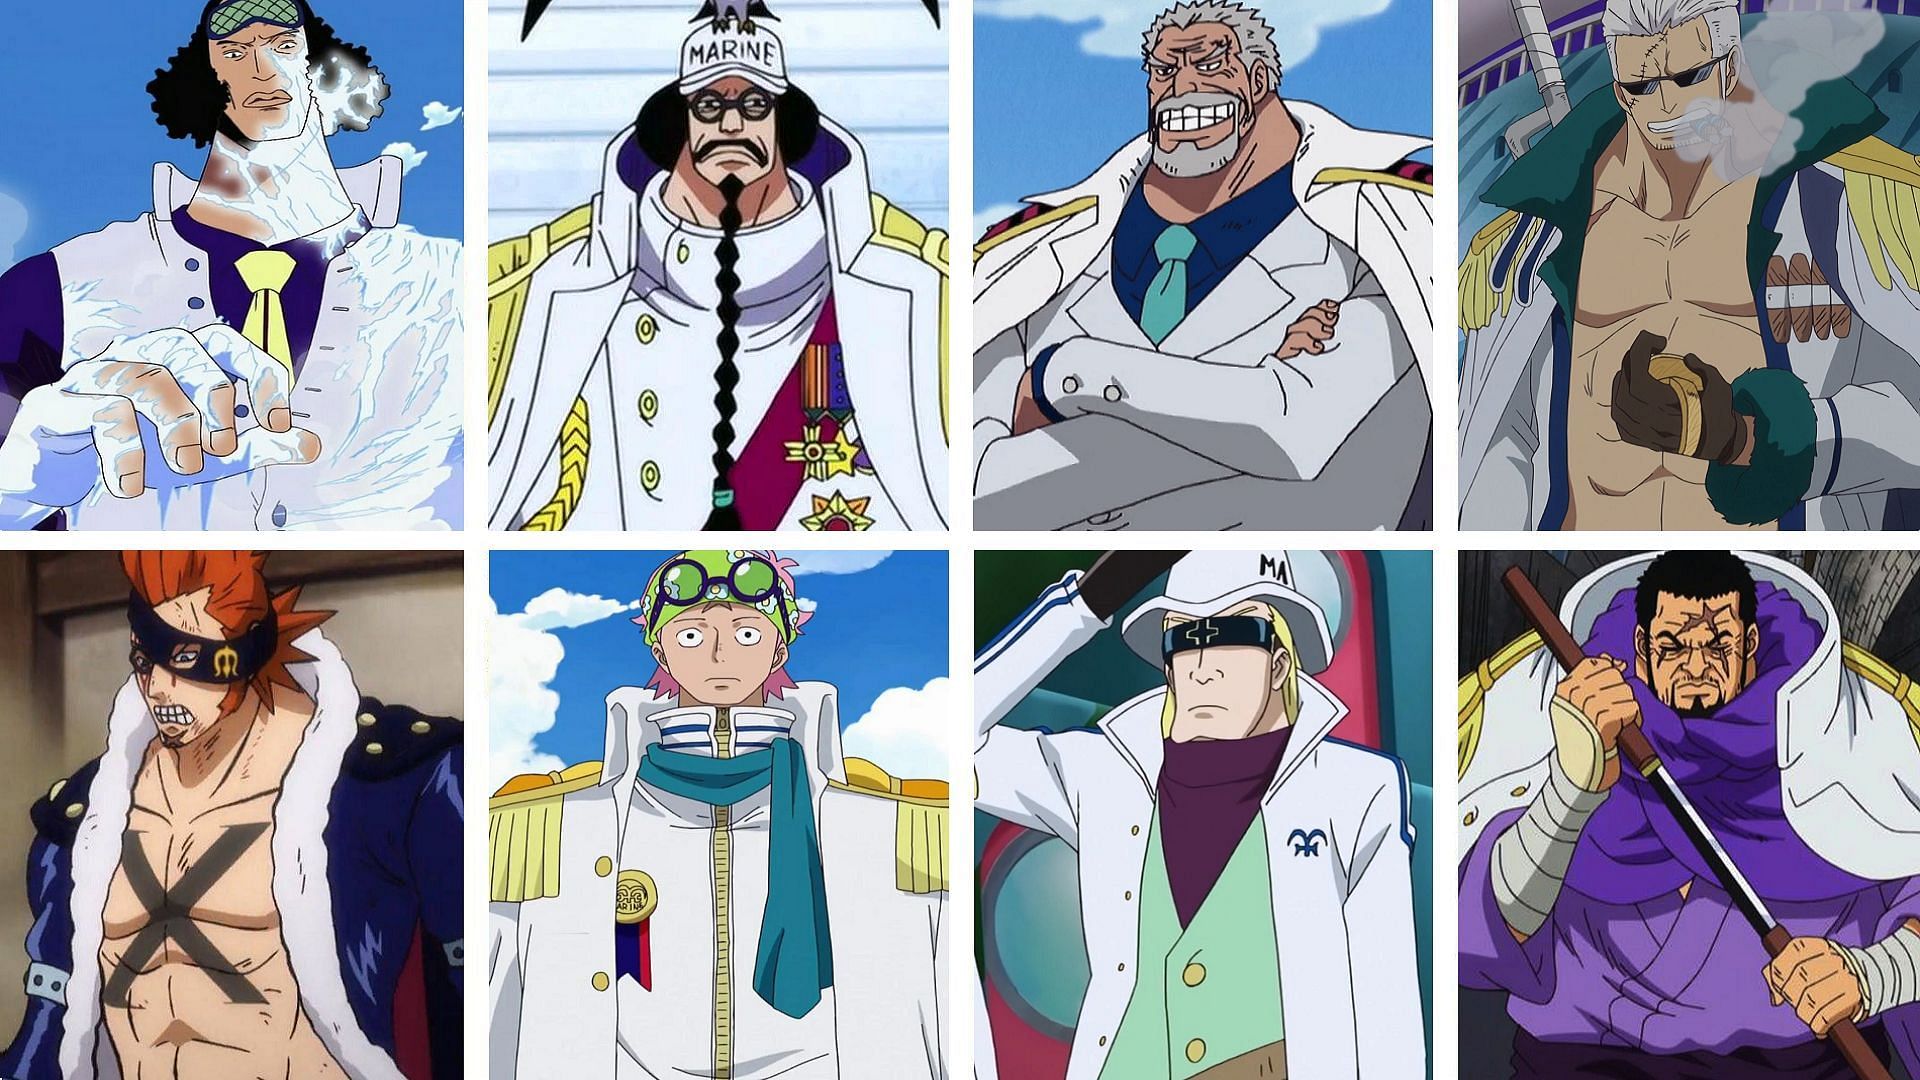 Both the confirmed and the more commonly supposed members of SWORD are considered to be &quot;good guys&quot; among the Marines (Image via Toei Animation, One Piece)